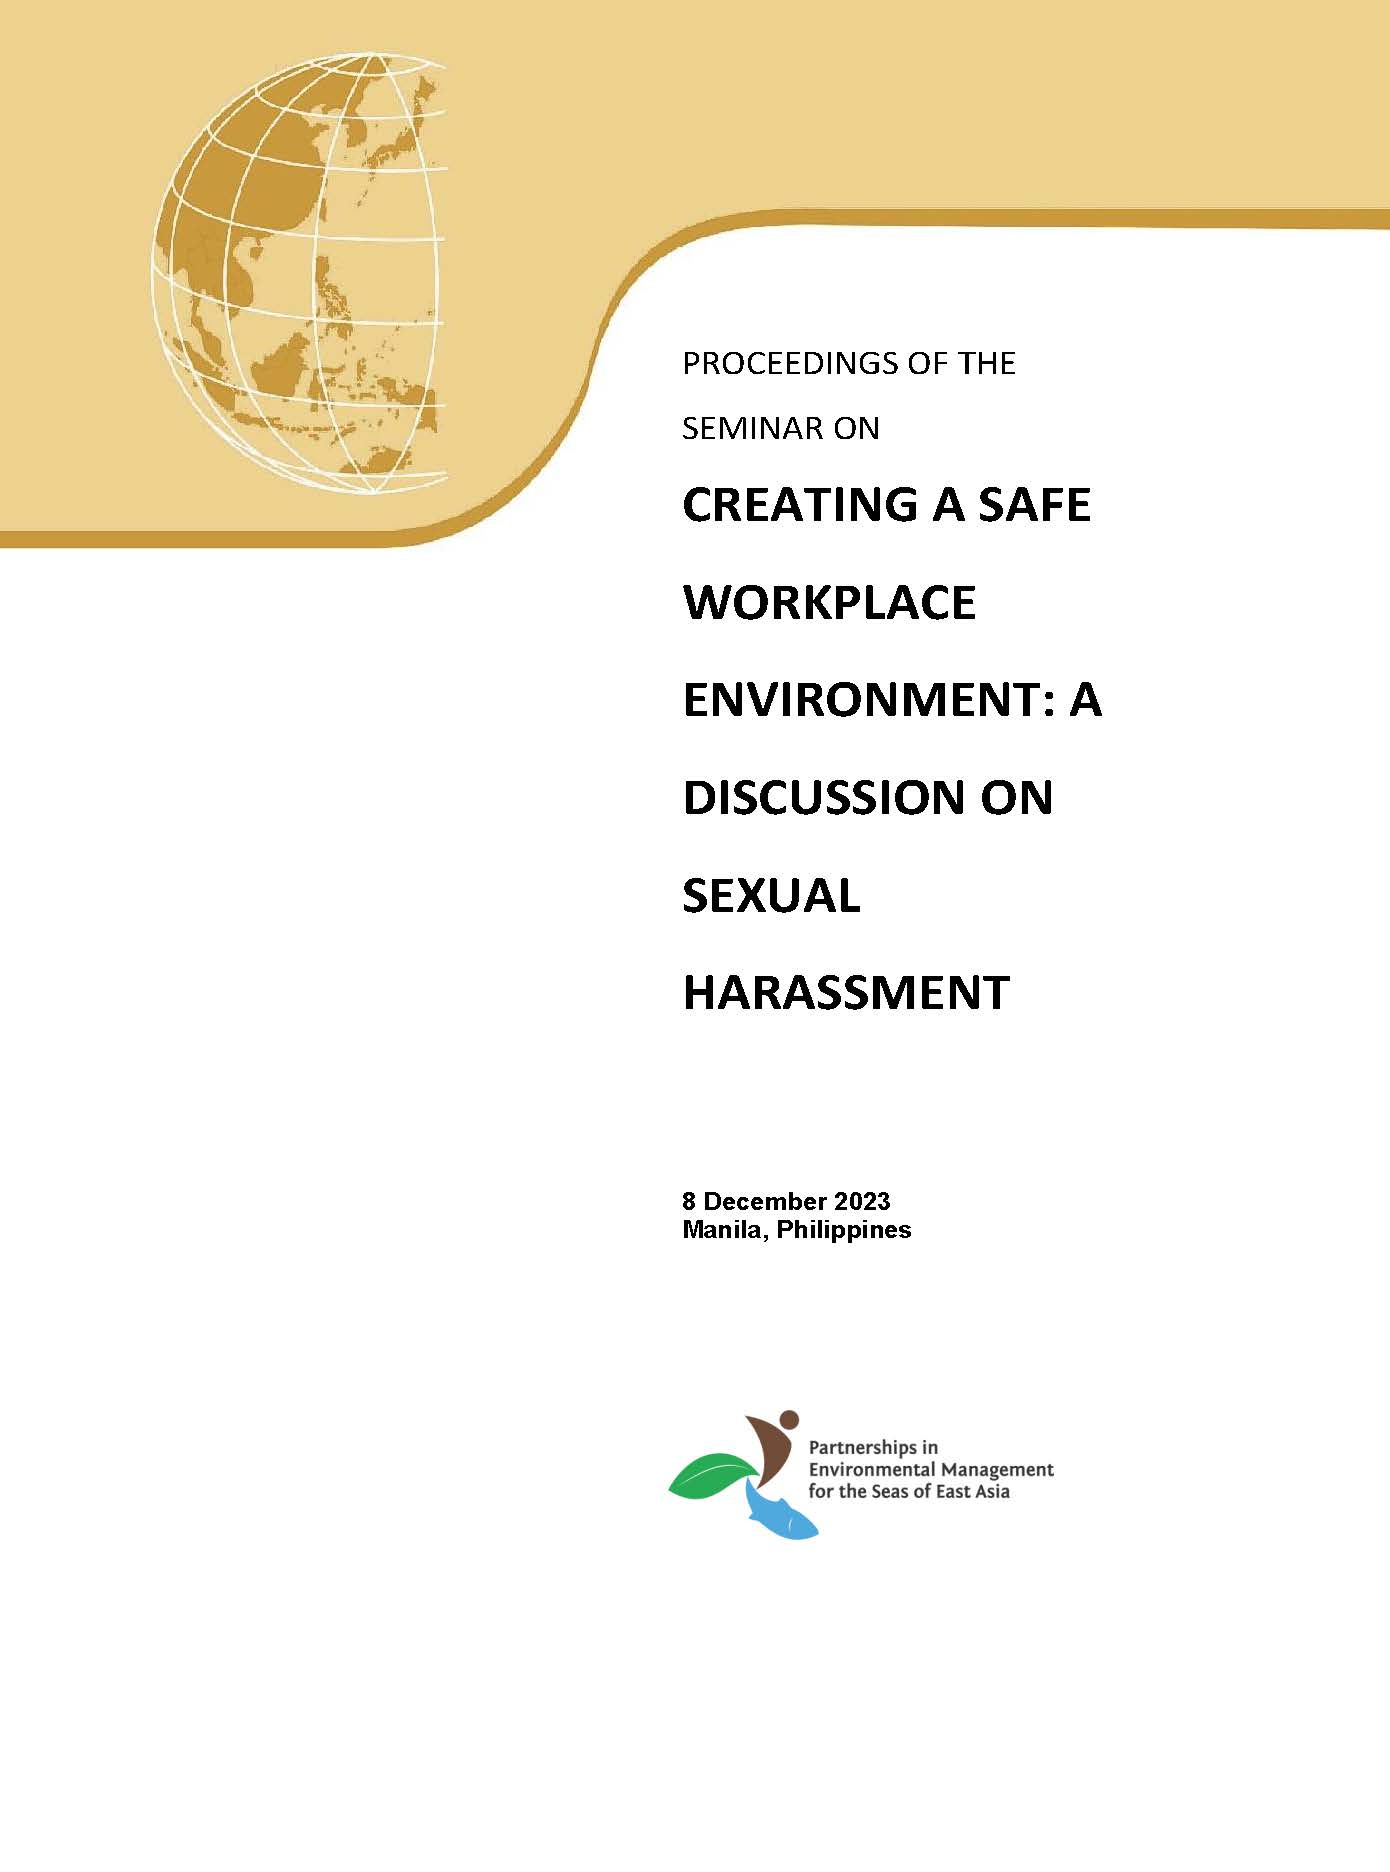 Proceedings on Creating a Safe Workplace Environment